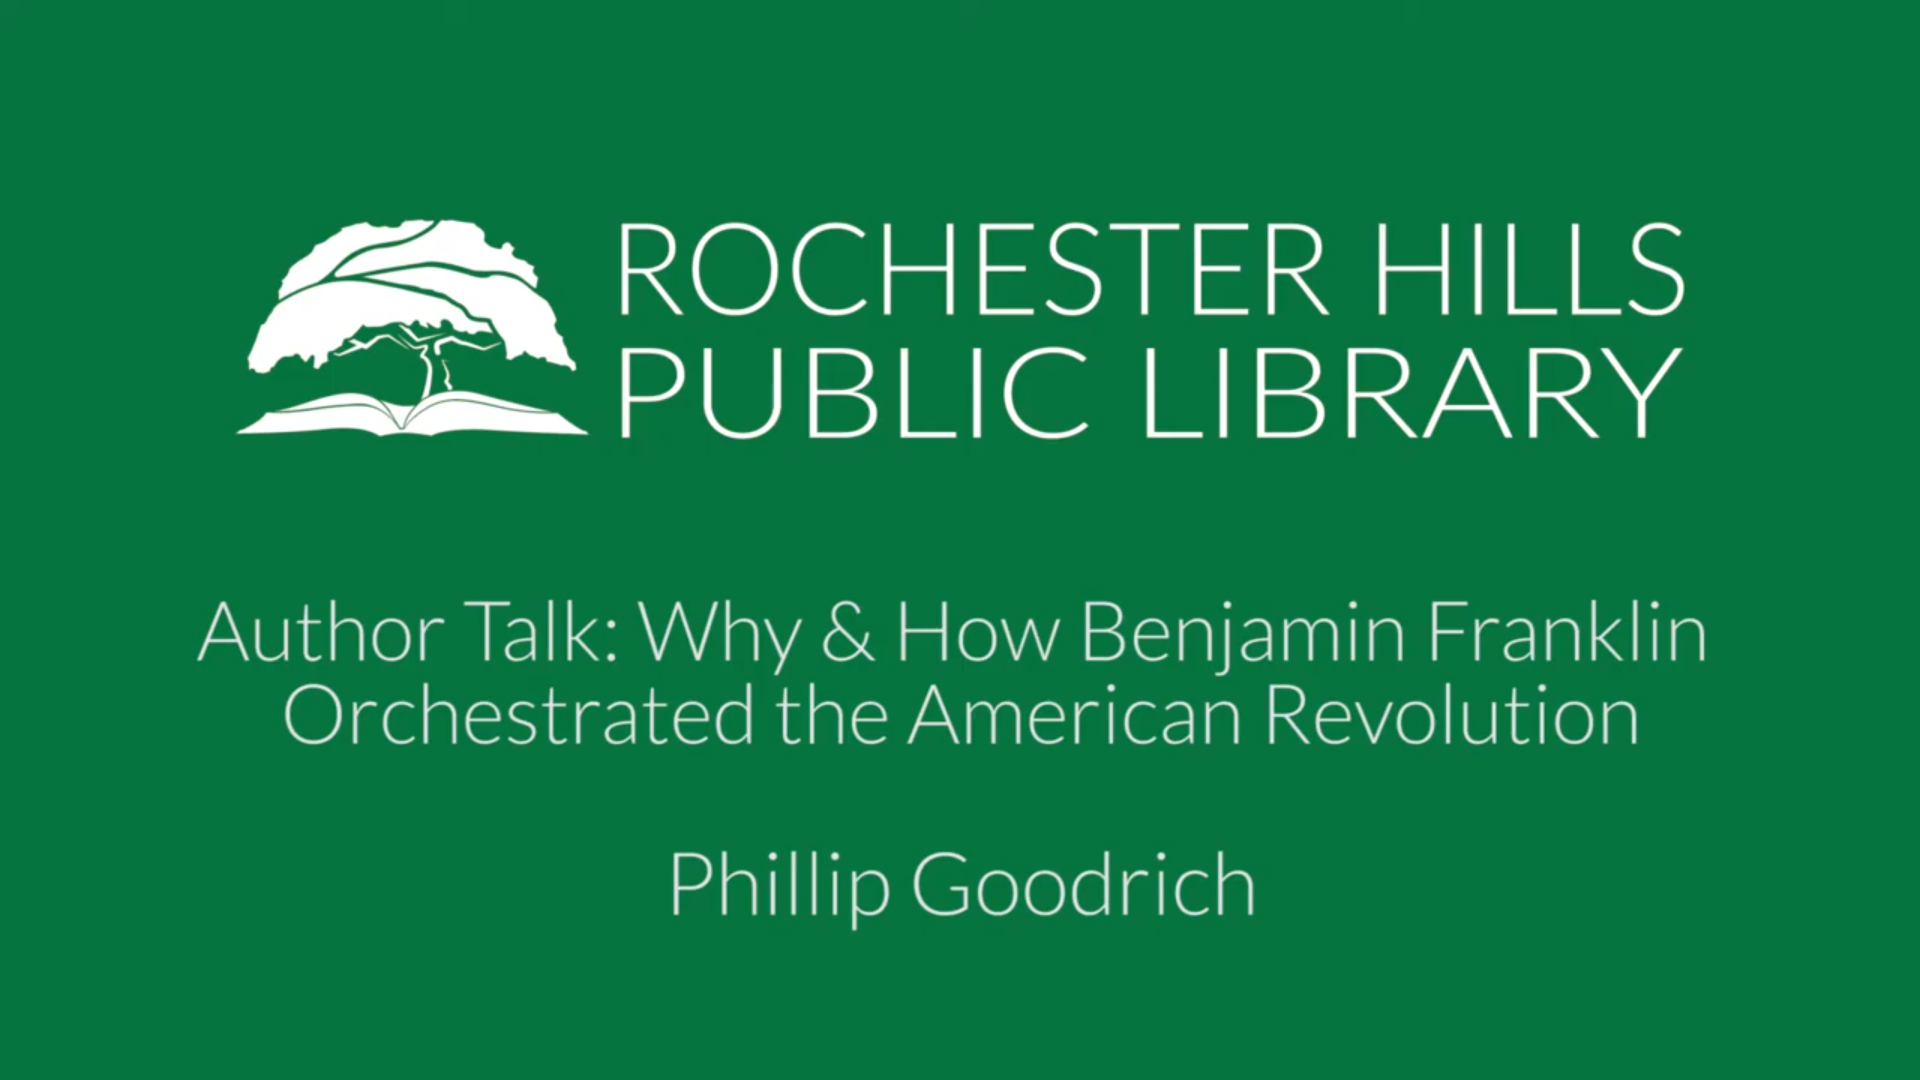 Author Talk: Why & How Benjamin Franklin Orchestrated the American Revolution with Phillip Goodrich